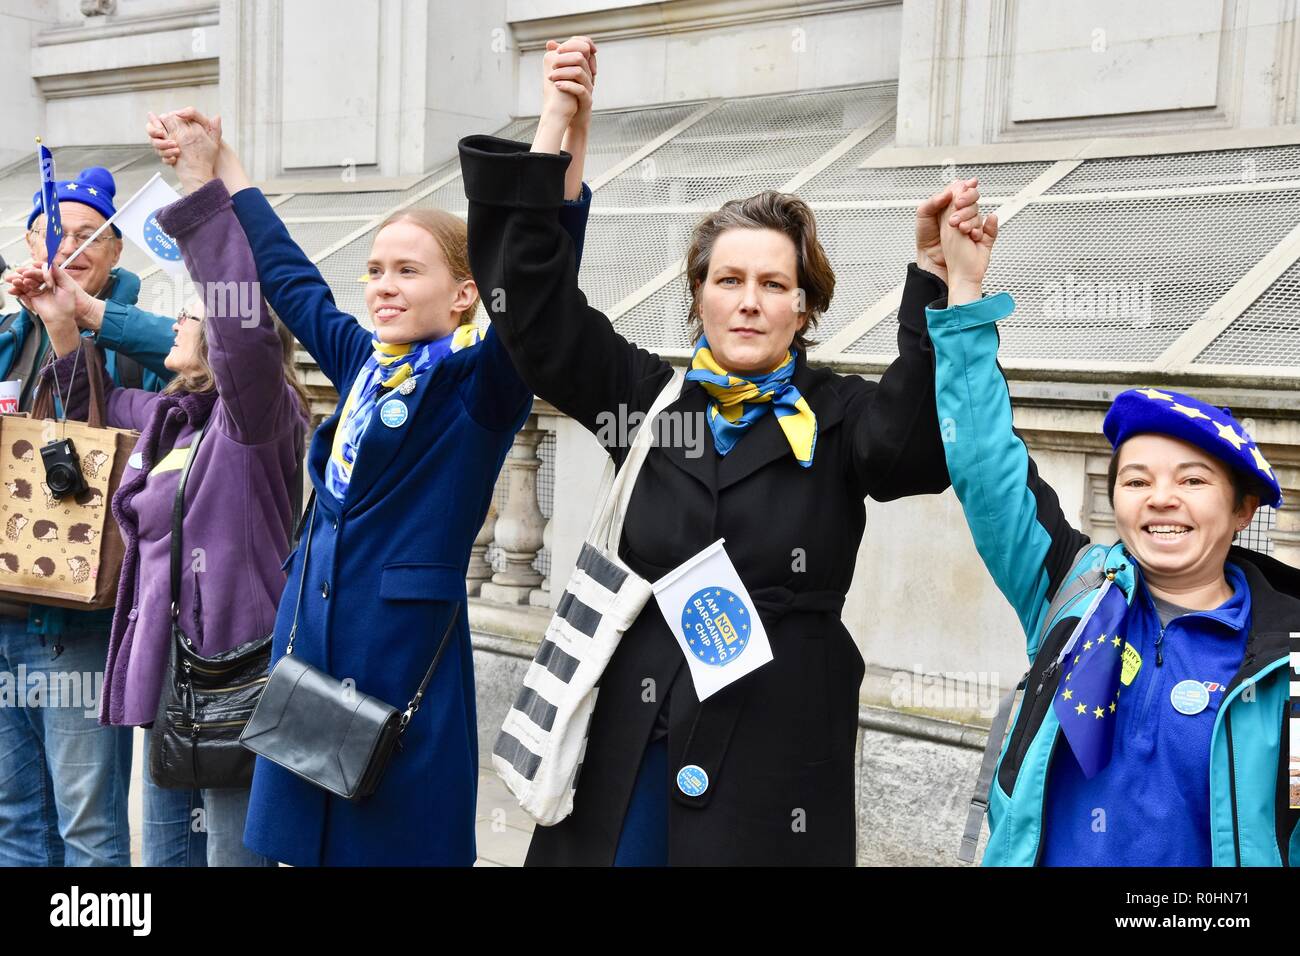 London, UK. 5th Nov 2018. The Last Mile,Protesters form a human chain from Parliament Square to 10 Downing Street to campaign for the right to stay in the UK after Brexit,London.UK Credit: michael melia/Alamy Live News Stock Photo